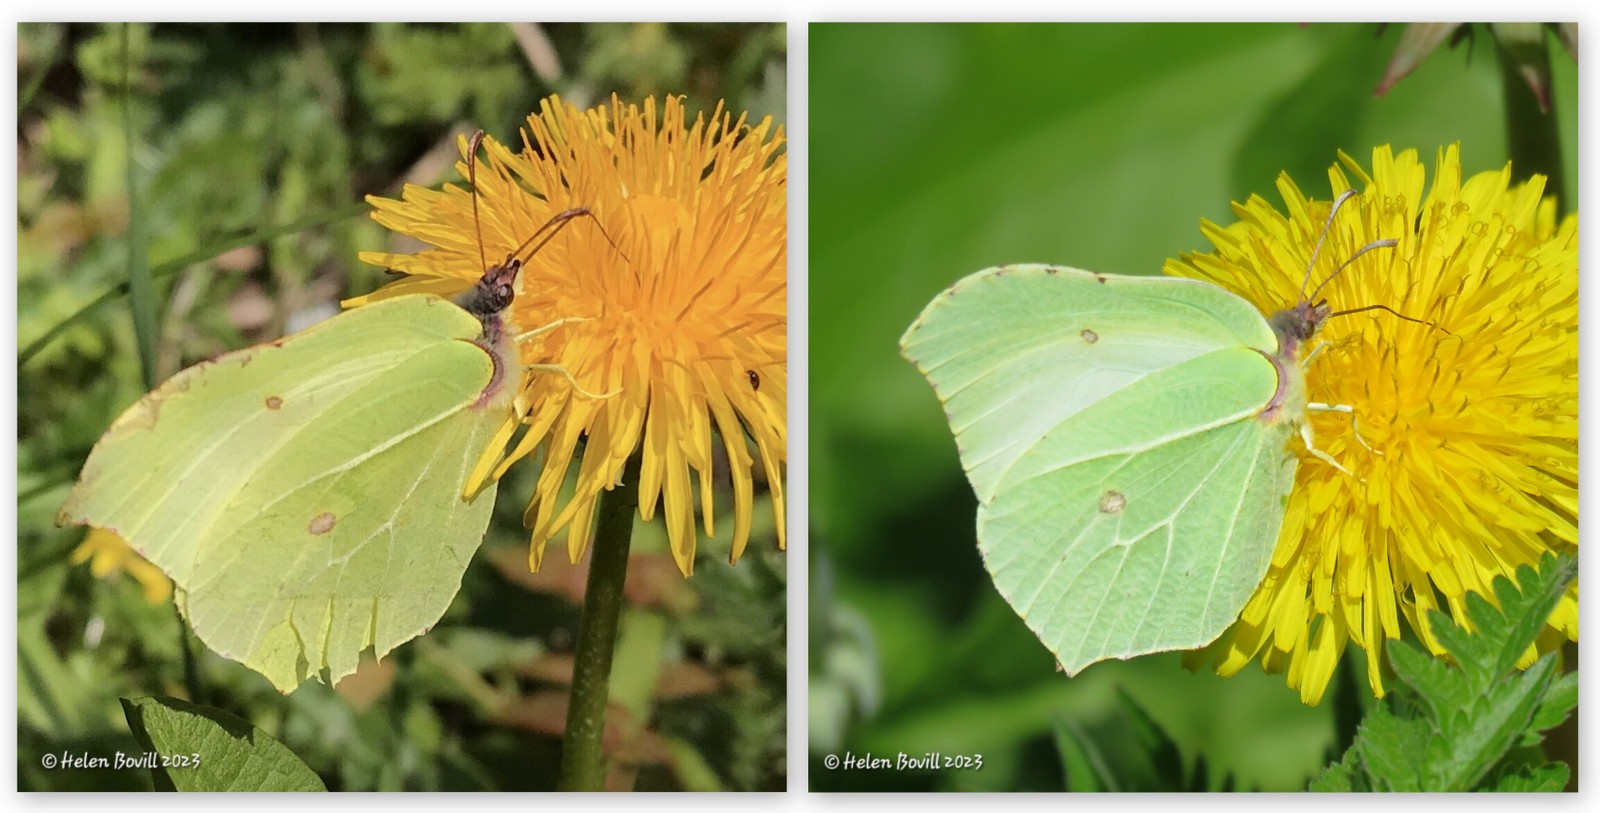 Two photos showing male and female Brimstone butterflies on Dandelions